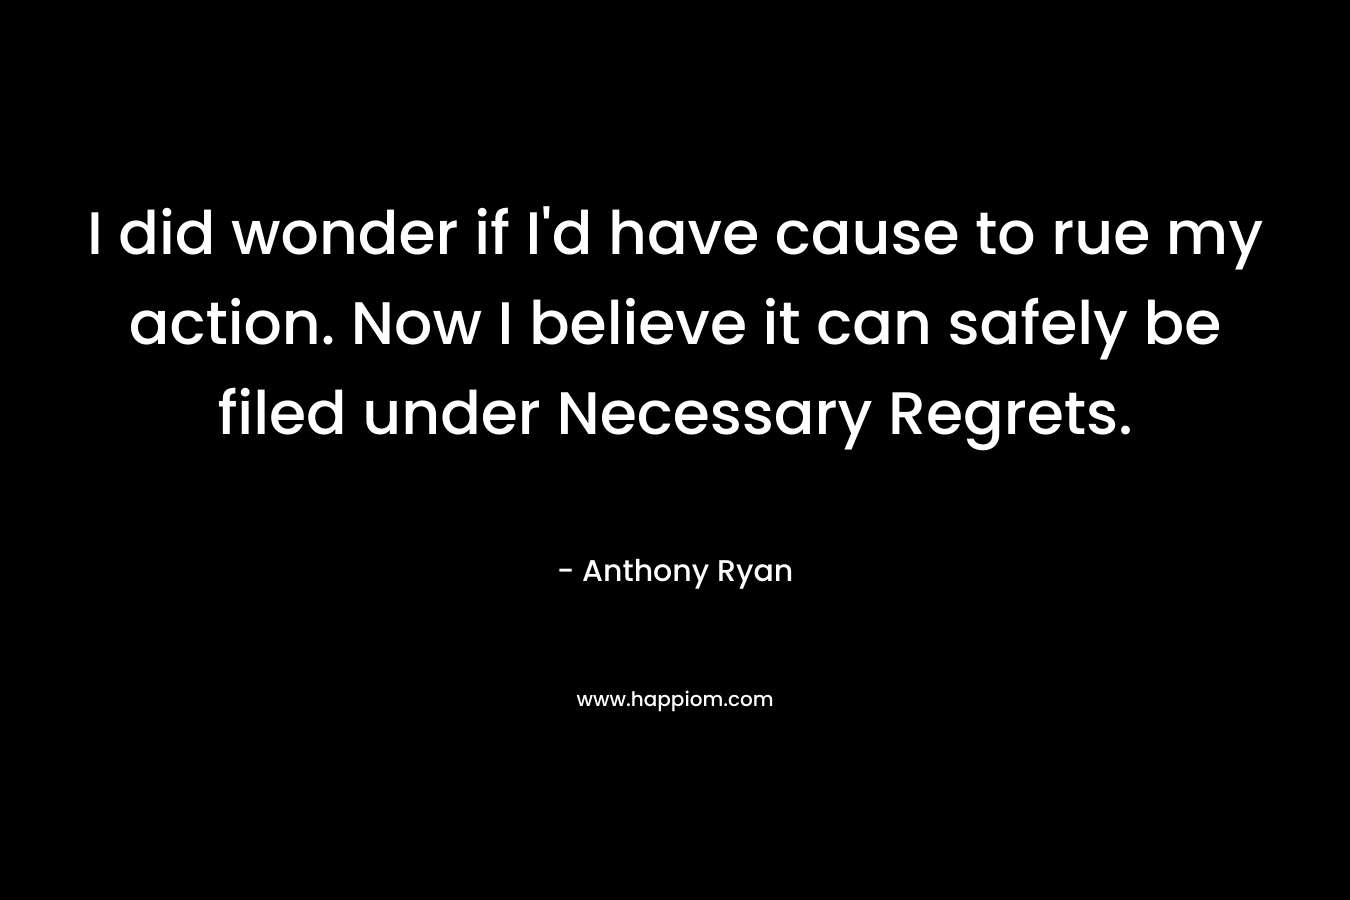 I did wonder if I'd have cause to rue my action. Now I believe it can safely be filed under Necessary Regrets.